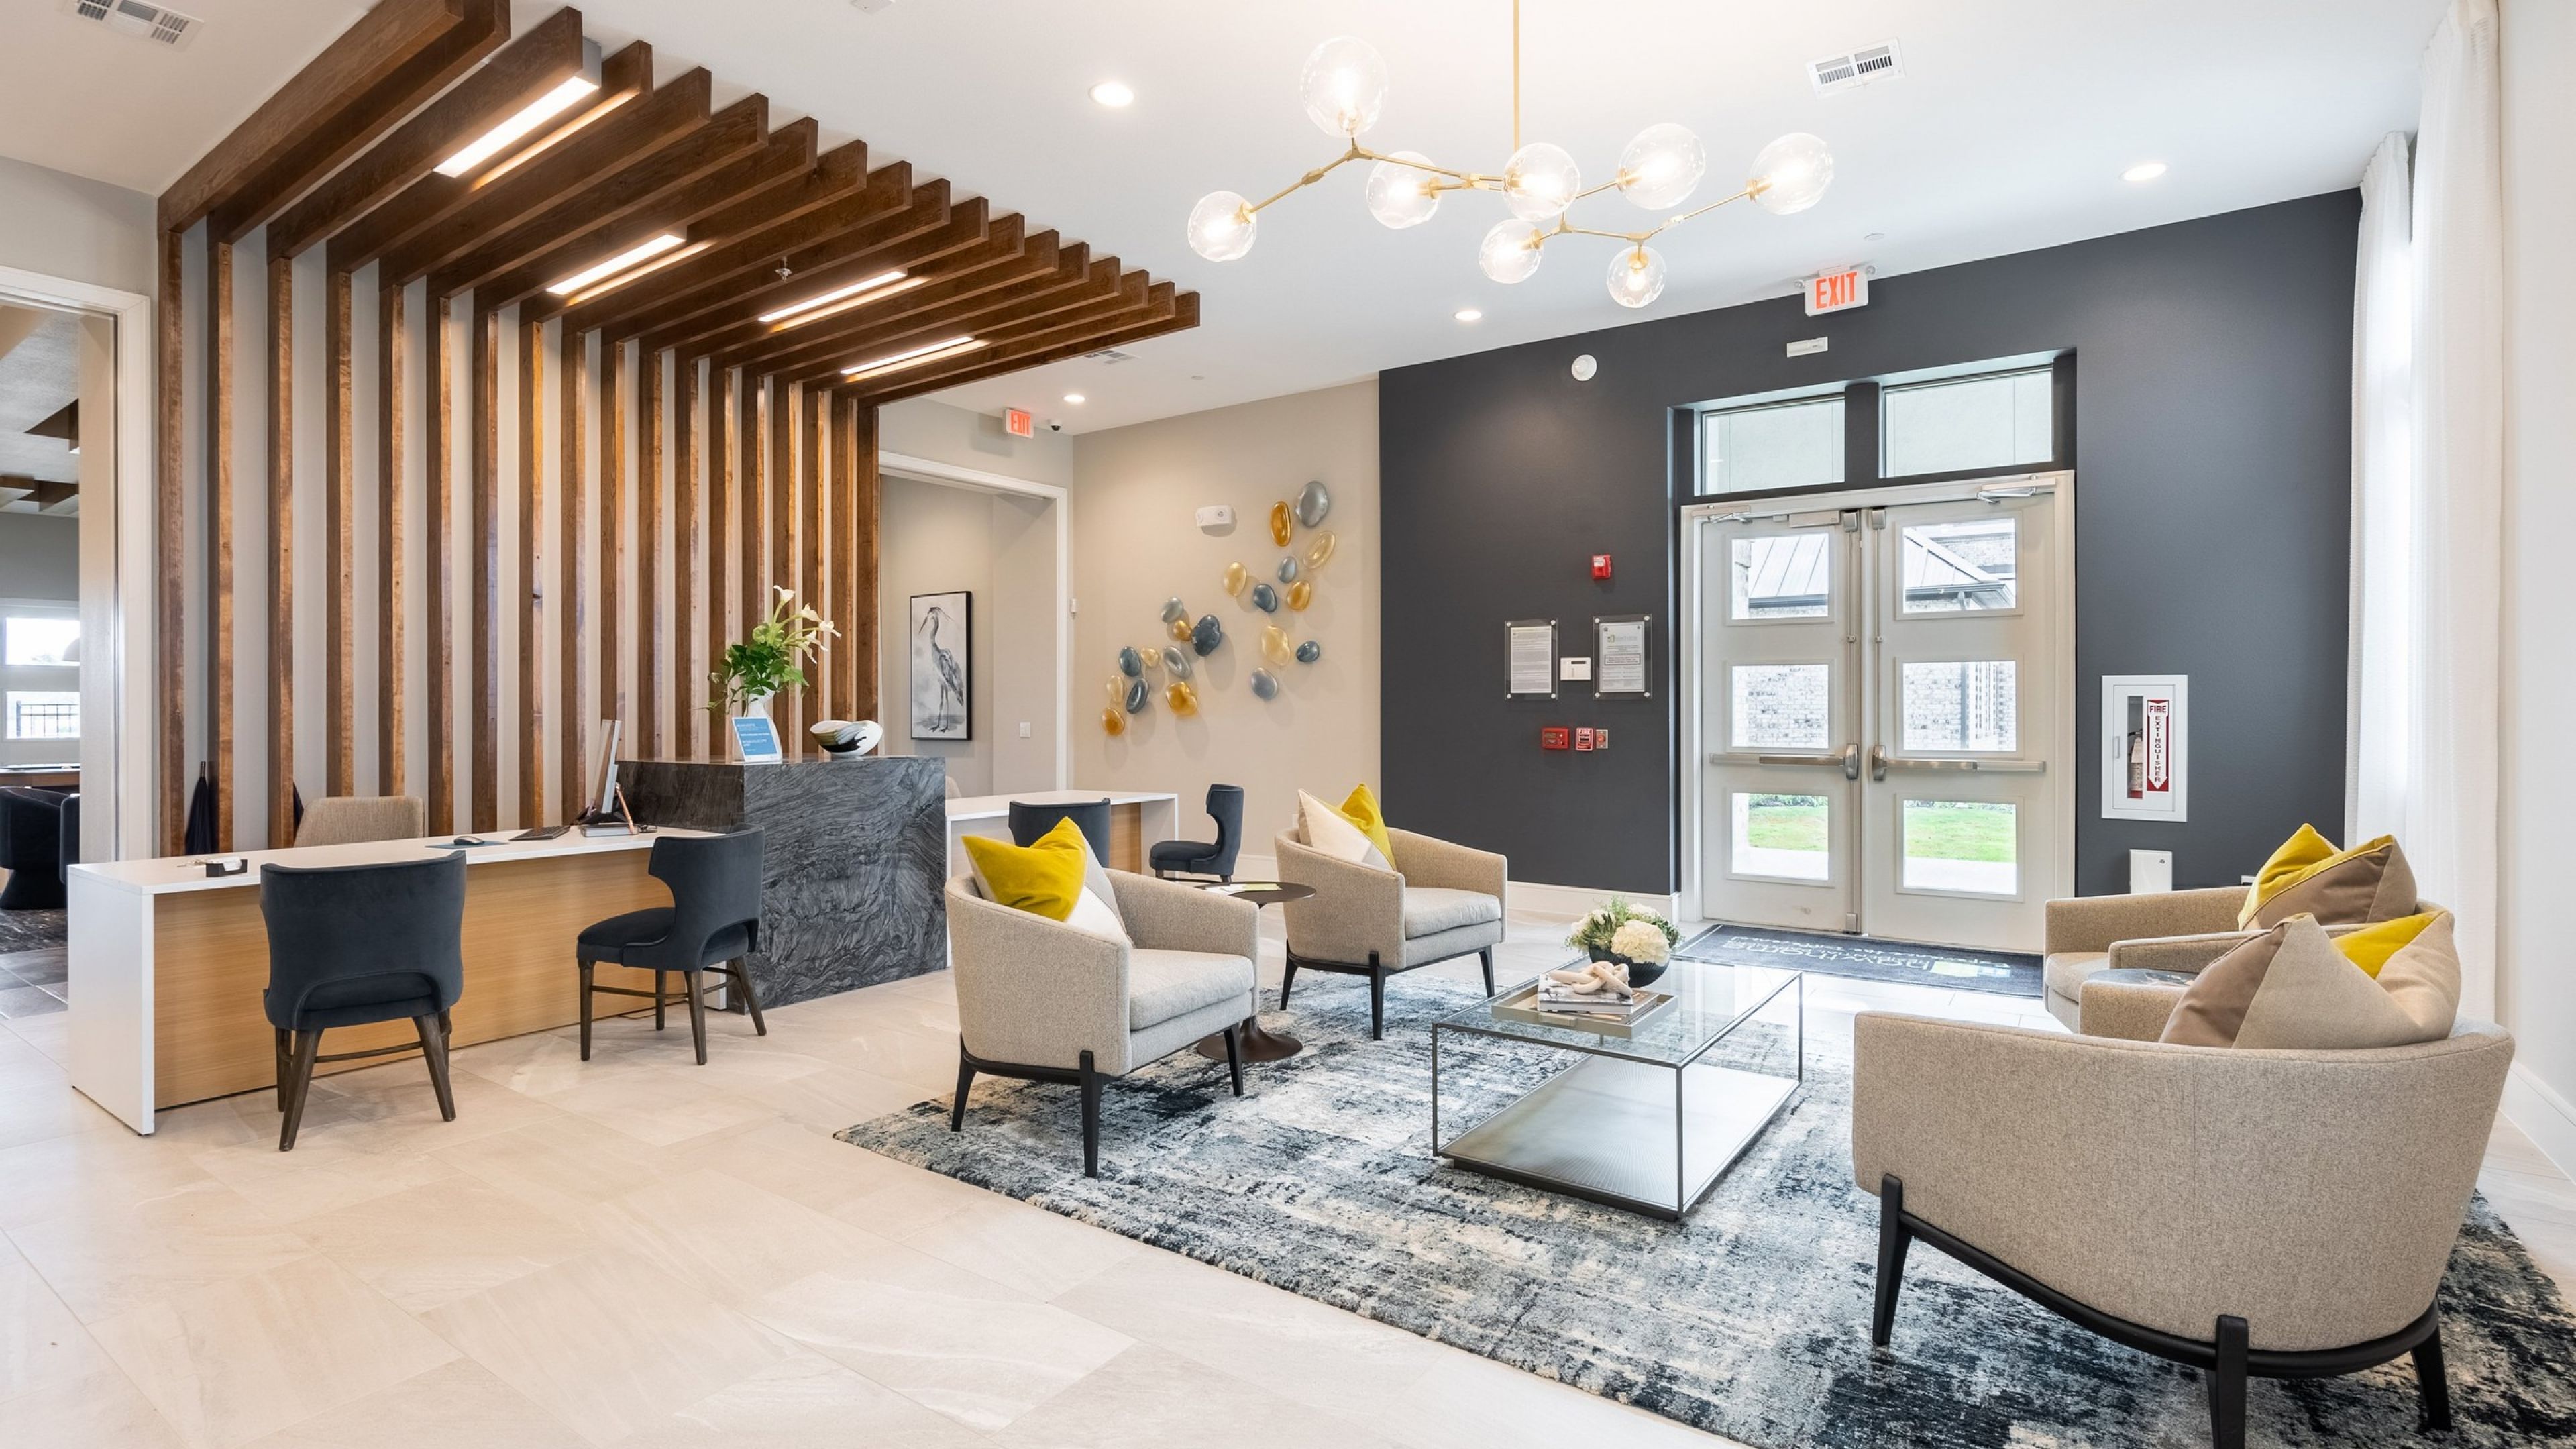 Hawthorne at Bay Forest resident leasing office with seating area and beautiful finishes